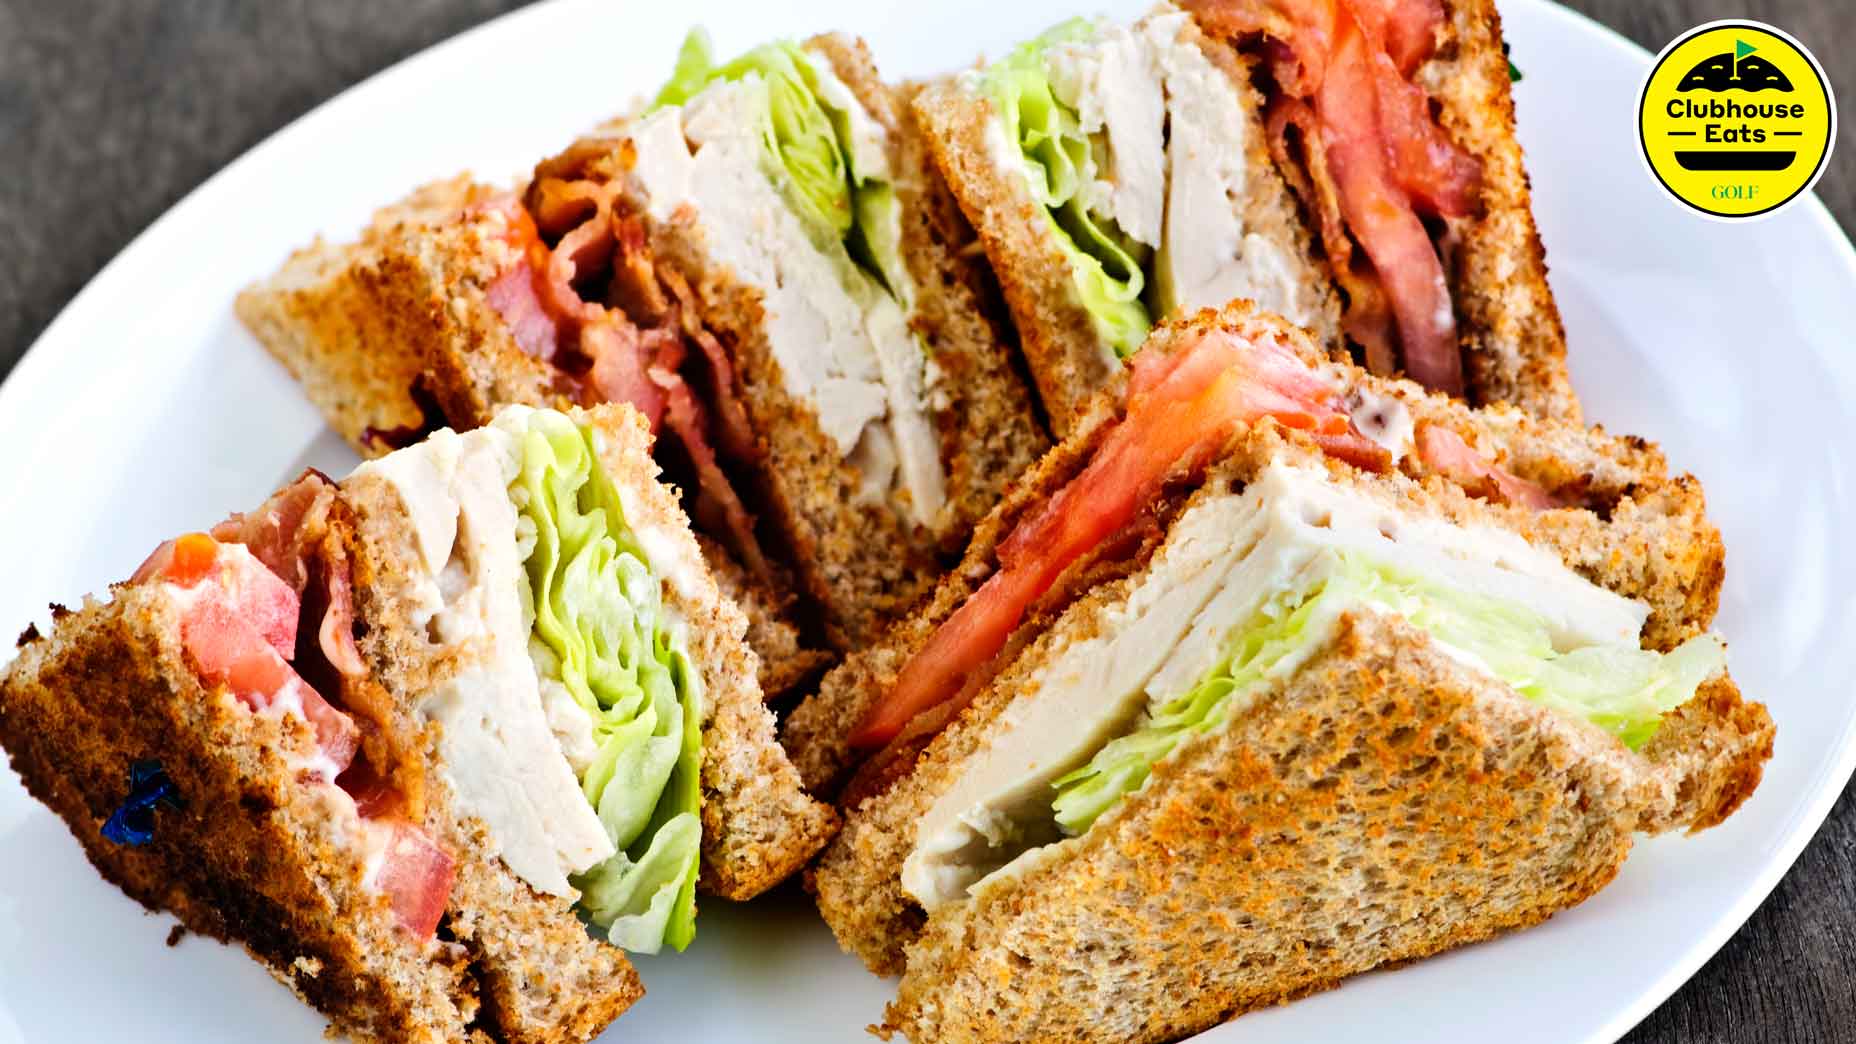 Images Of Club Sandwich